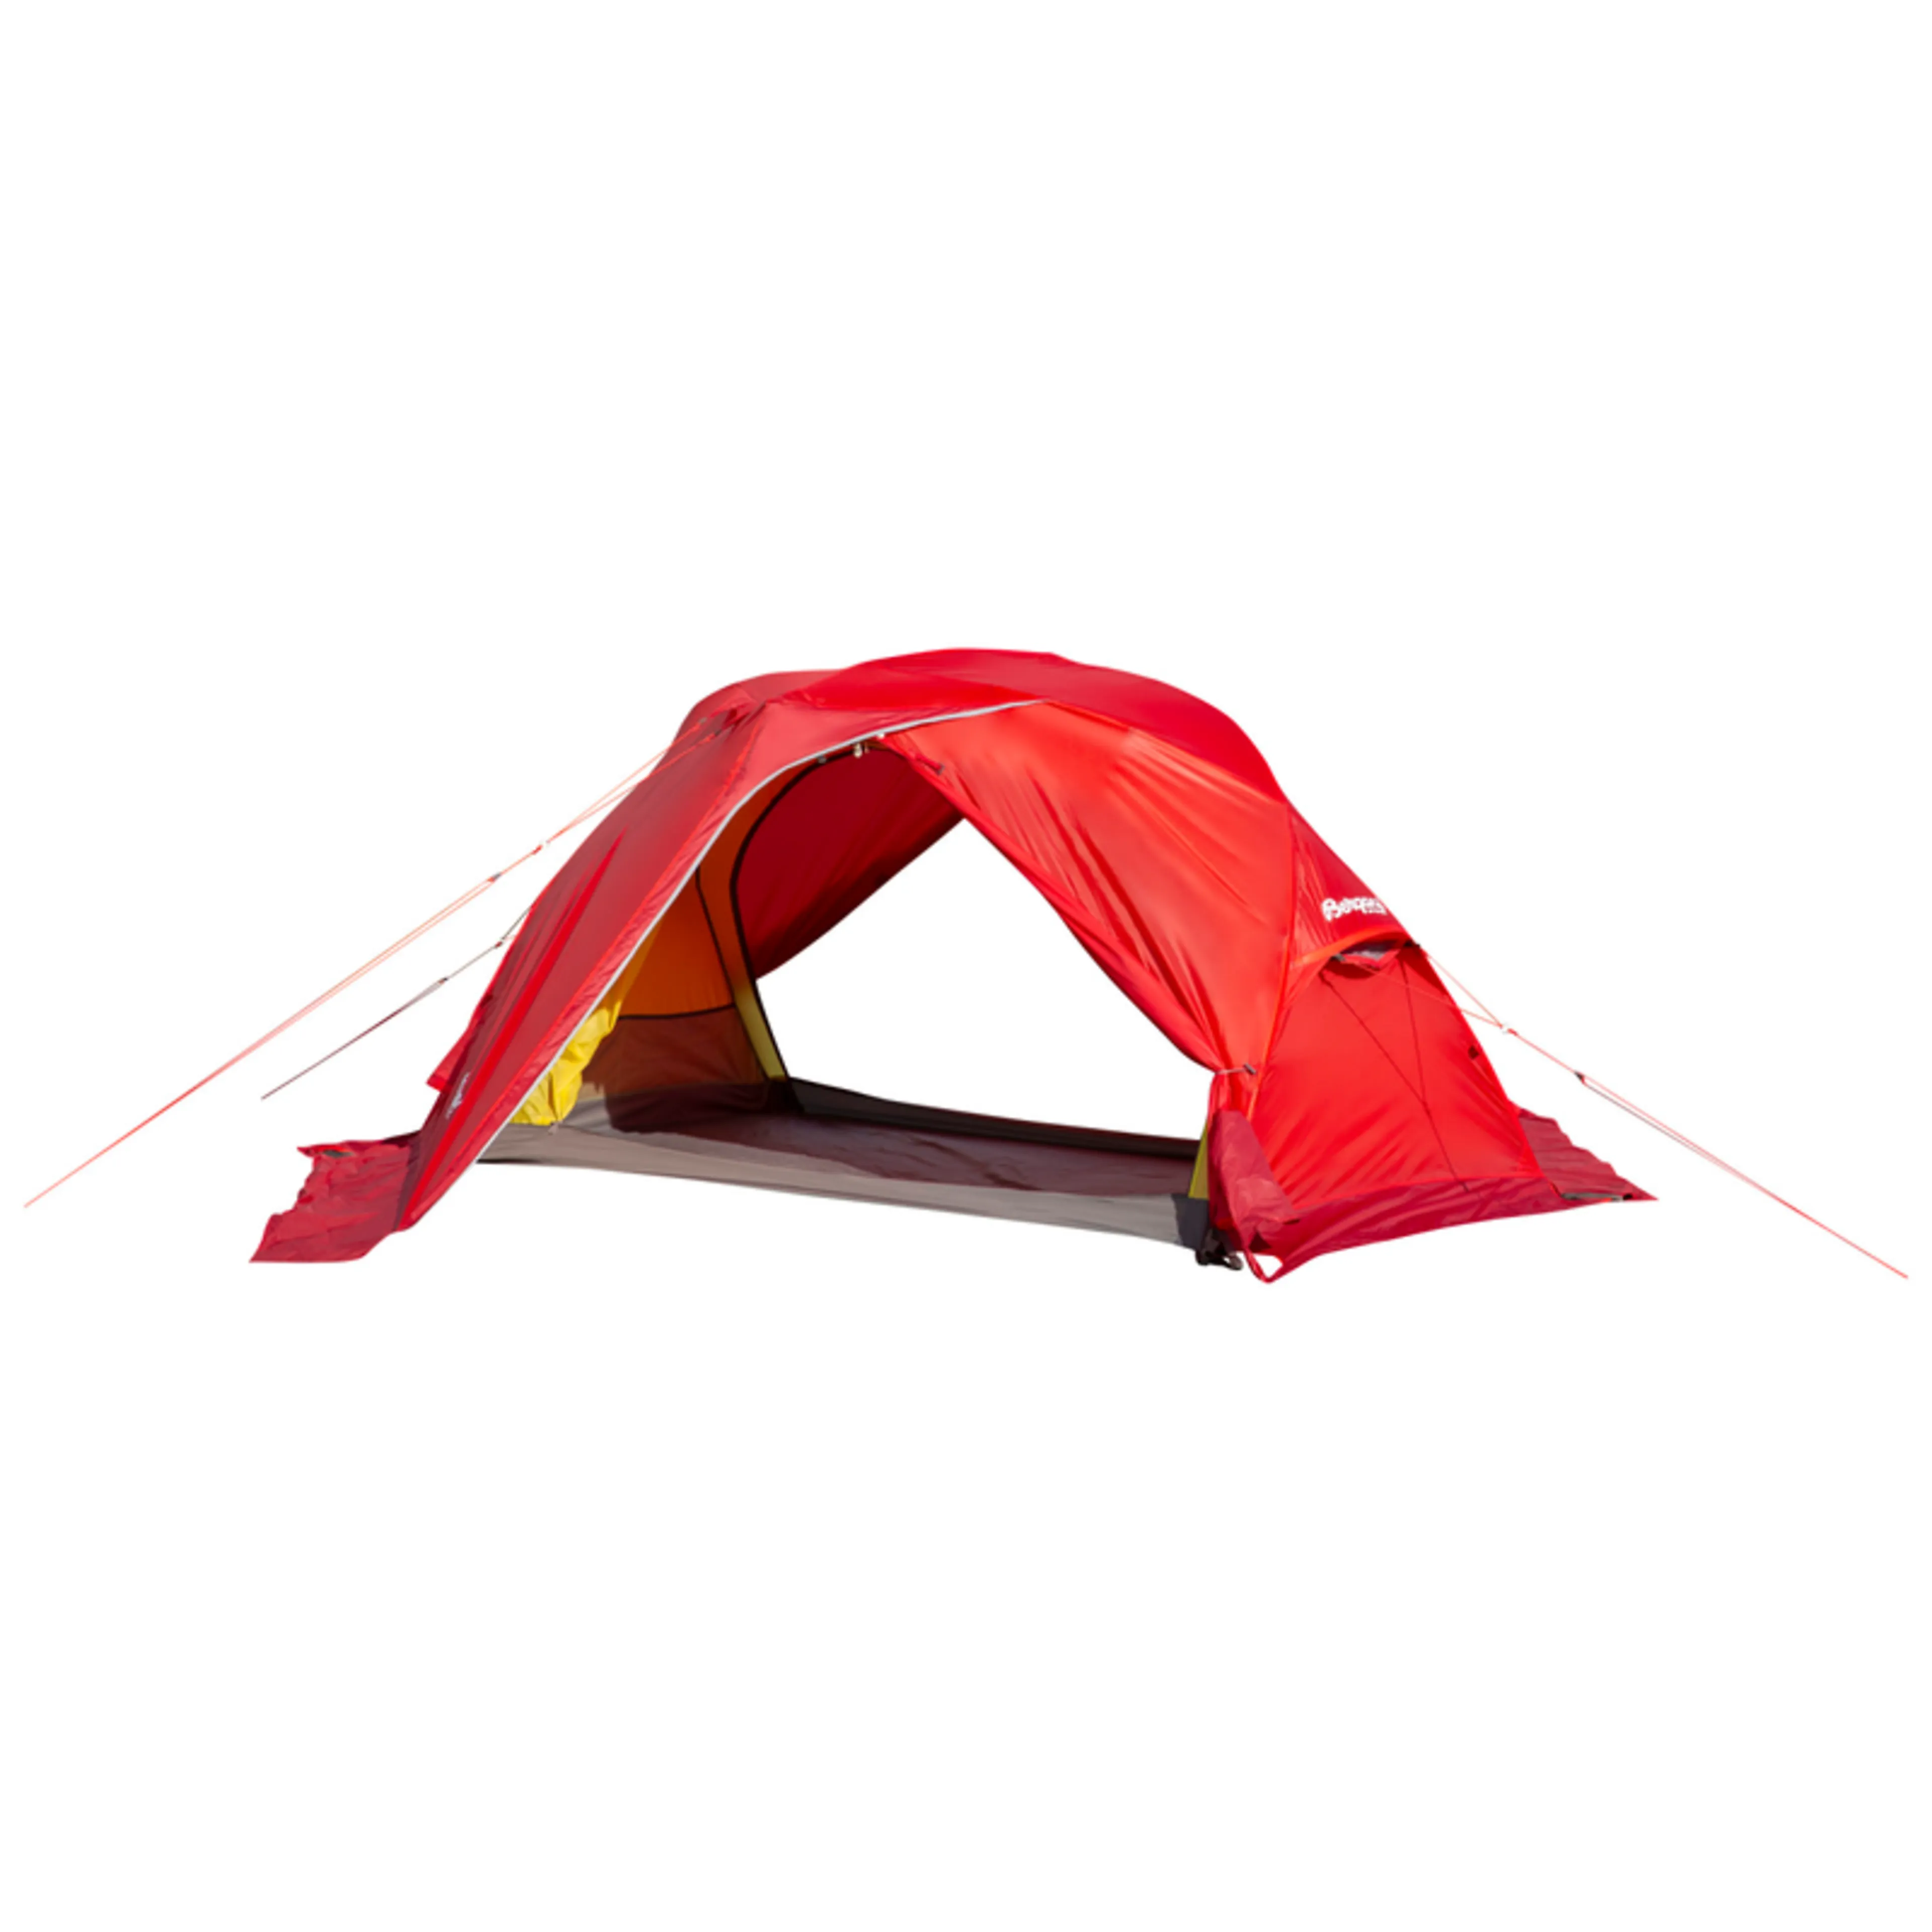 Helium Expedition Dome 2 Tent